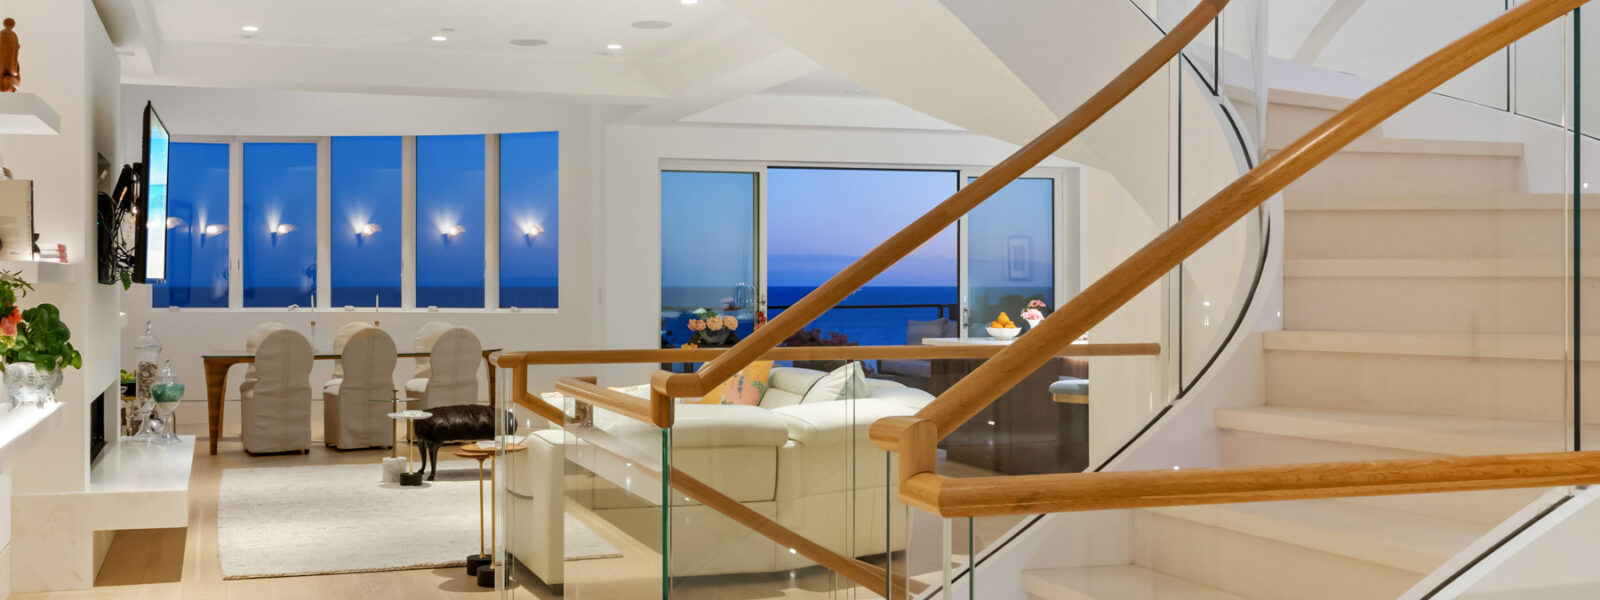 Modern Curved Staircase with Glass | Malibu, California